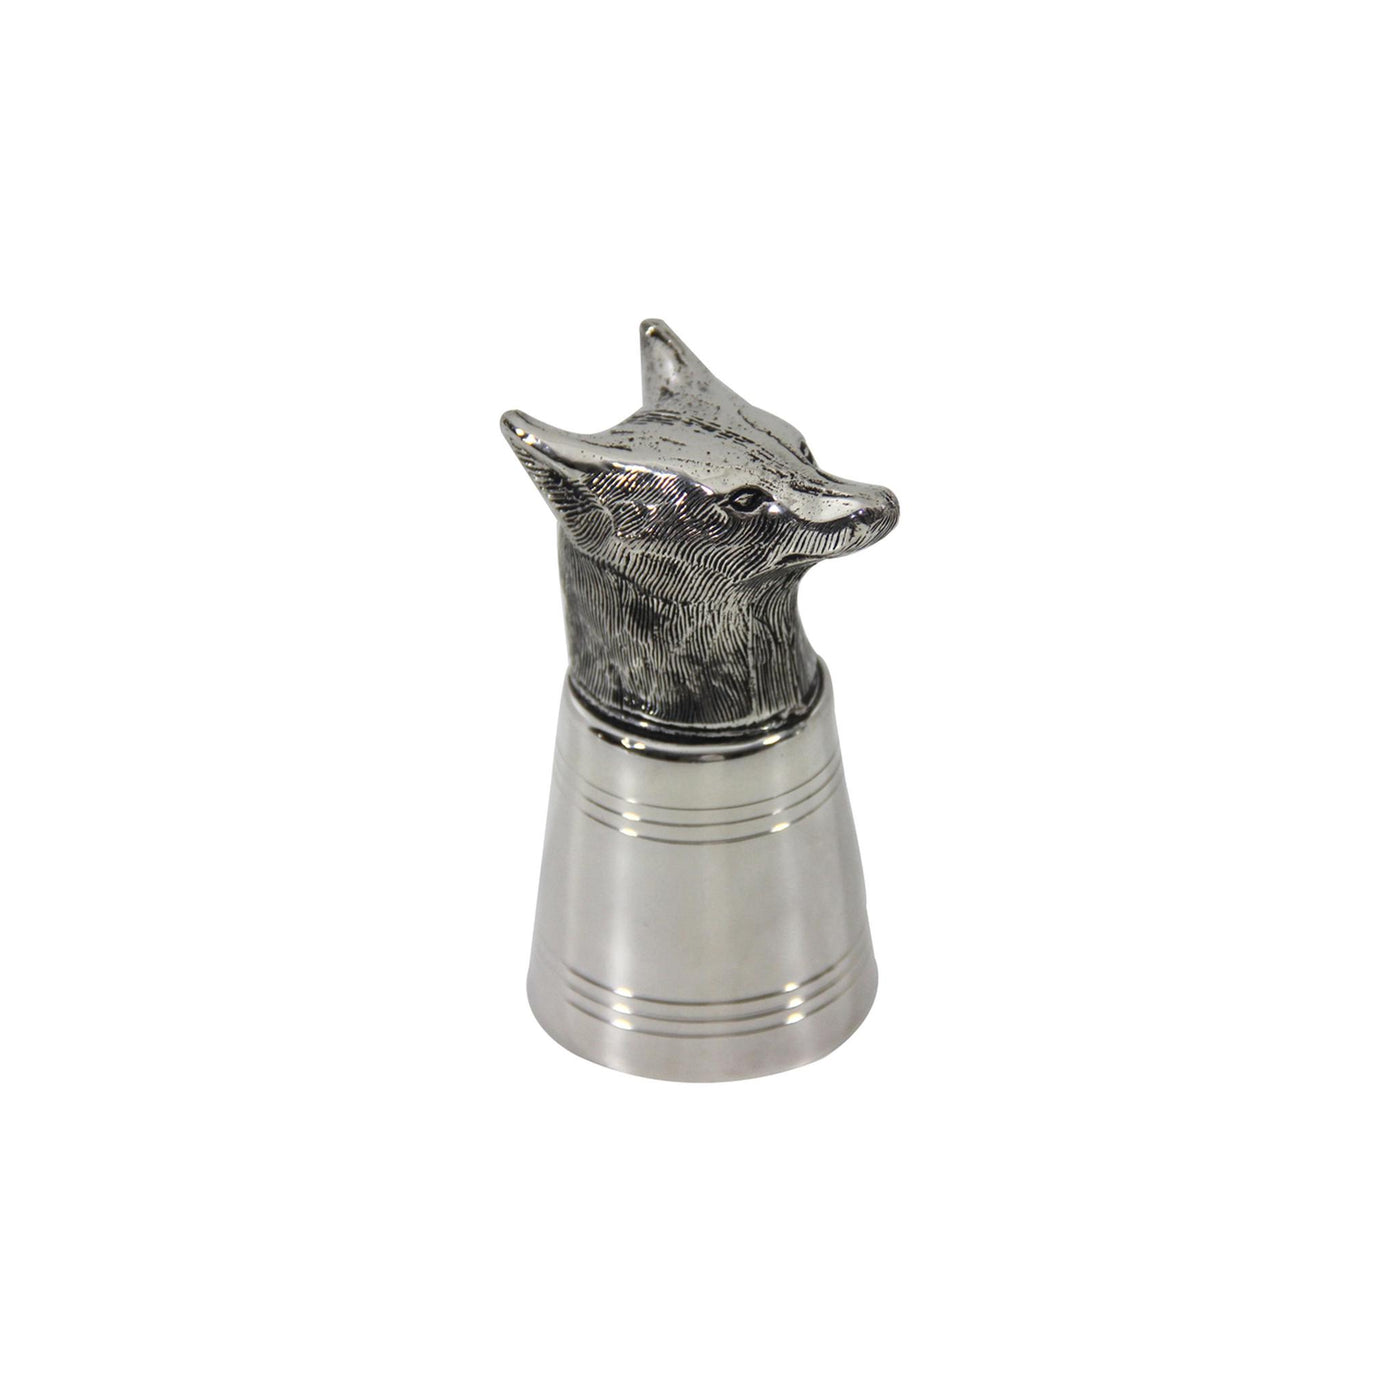 Silver Plated Animal Head Jiggers-Lifestyle-Kevin's Fine Outdoor Gear & Apparel